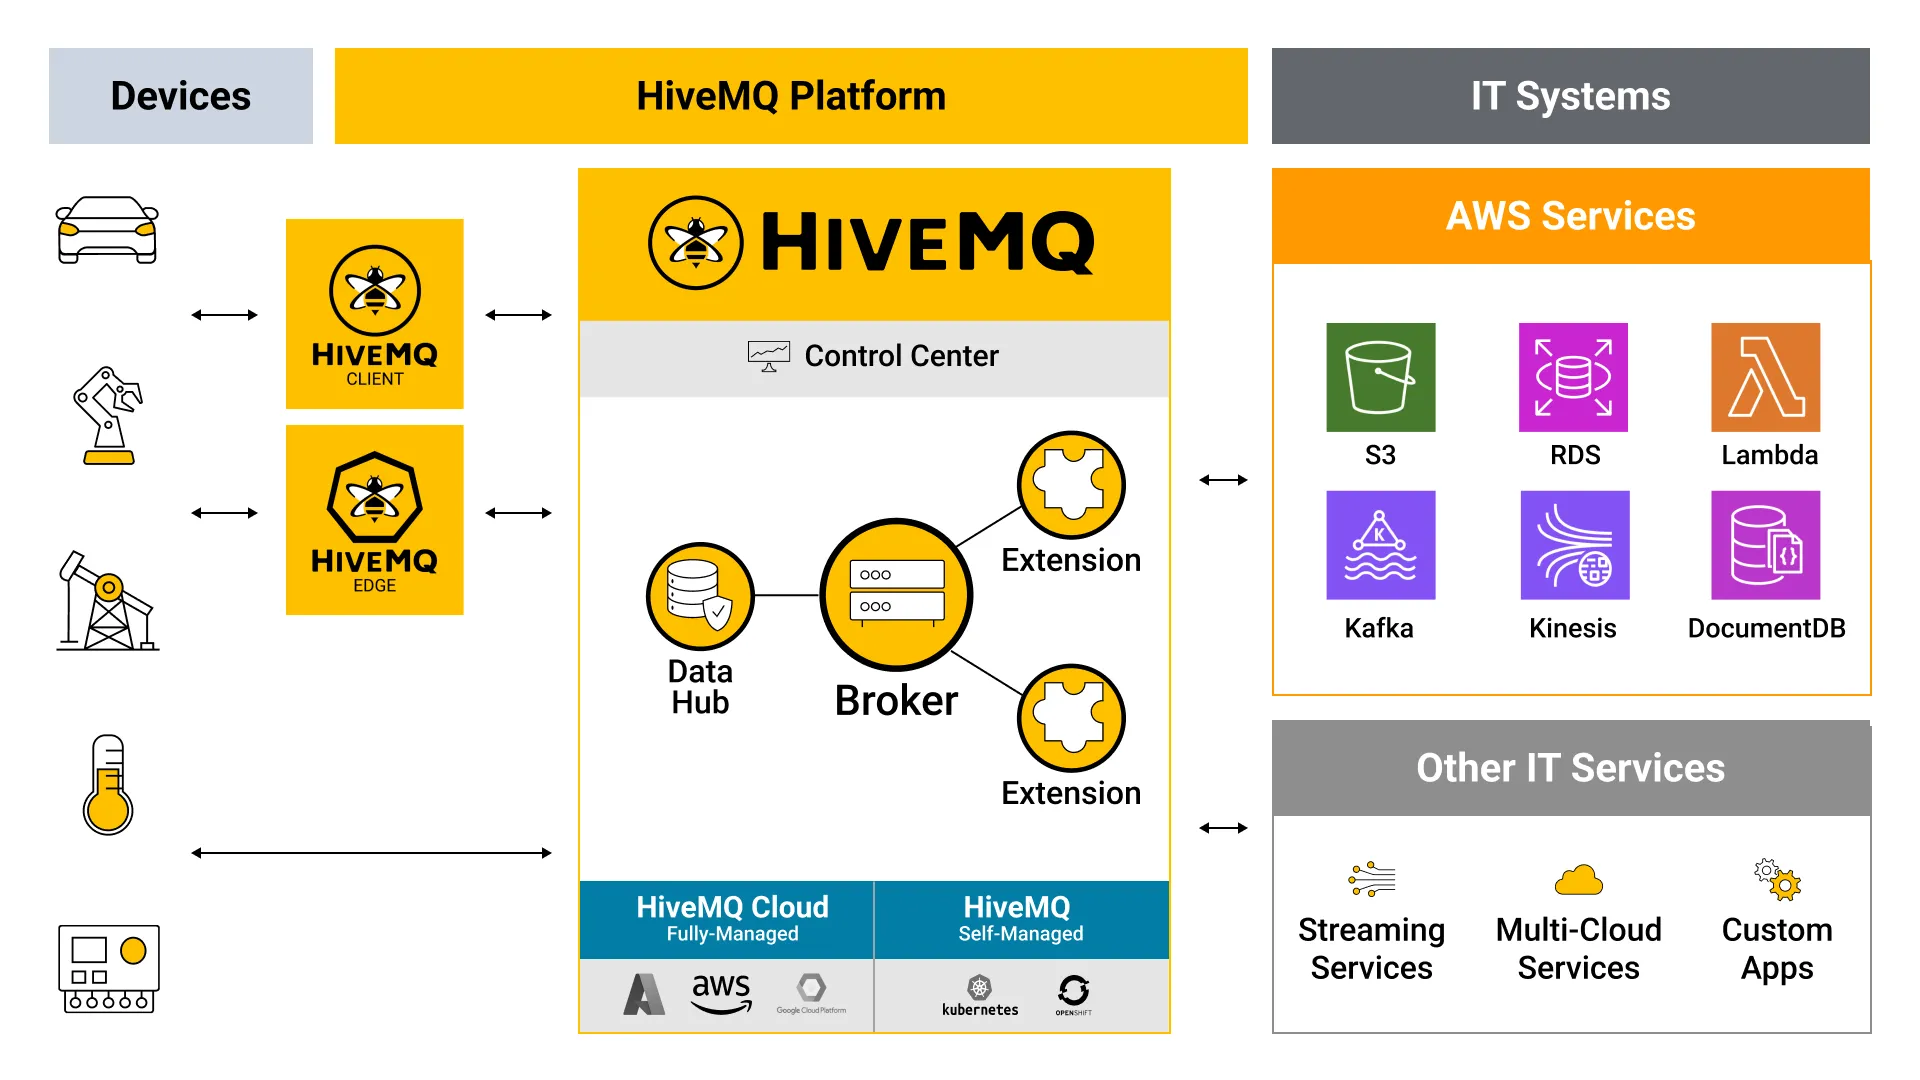 HiveMQ and AWS Architectural Overview